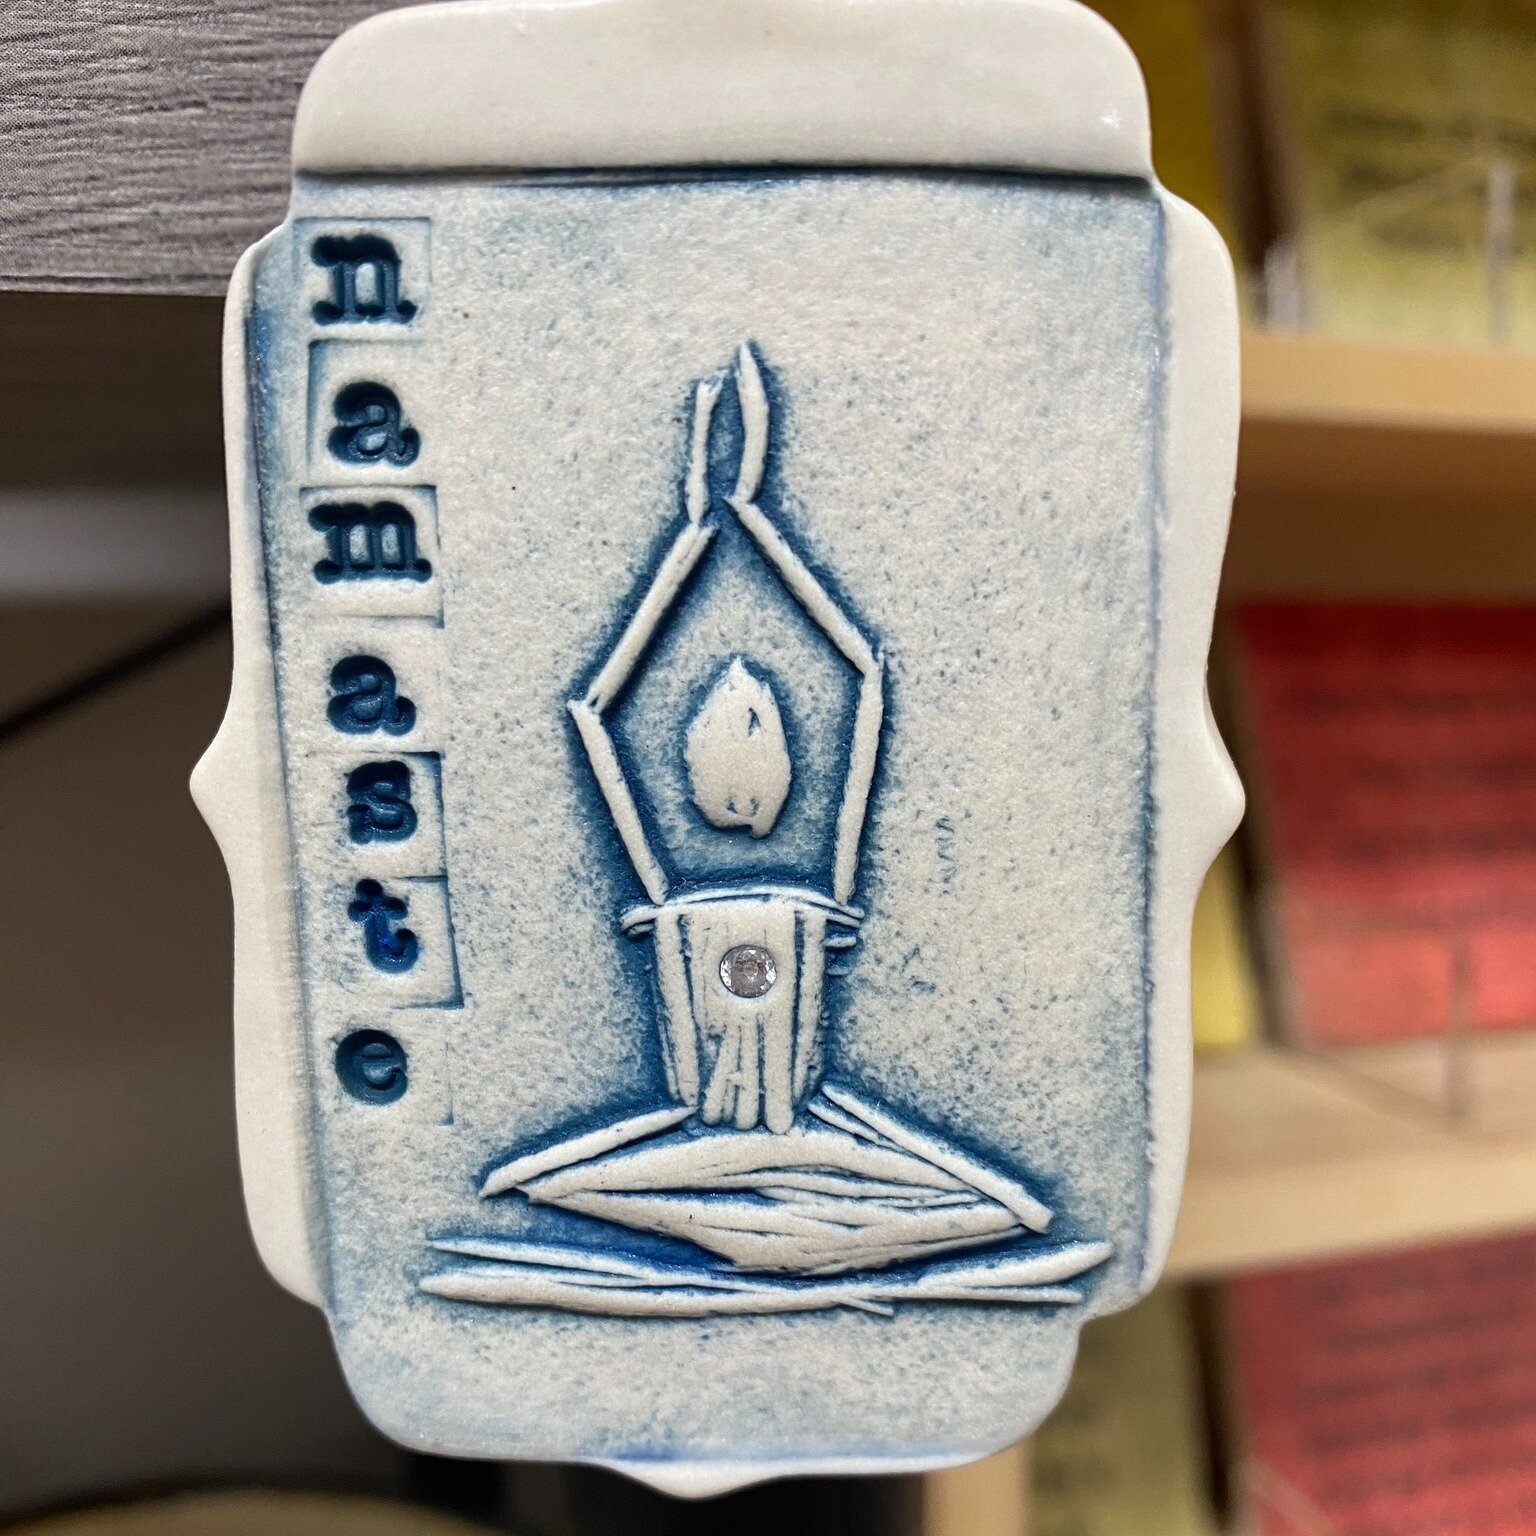 NEW VENDOR ALERT!  Check out the beautiful, handmade pieces that Gemstone Pottery dropped off!